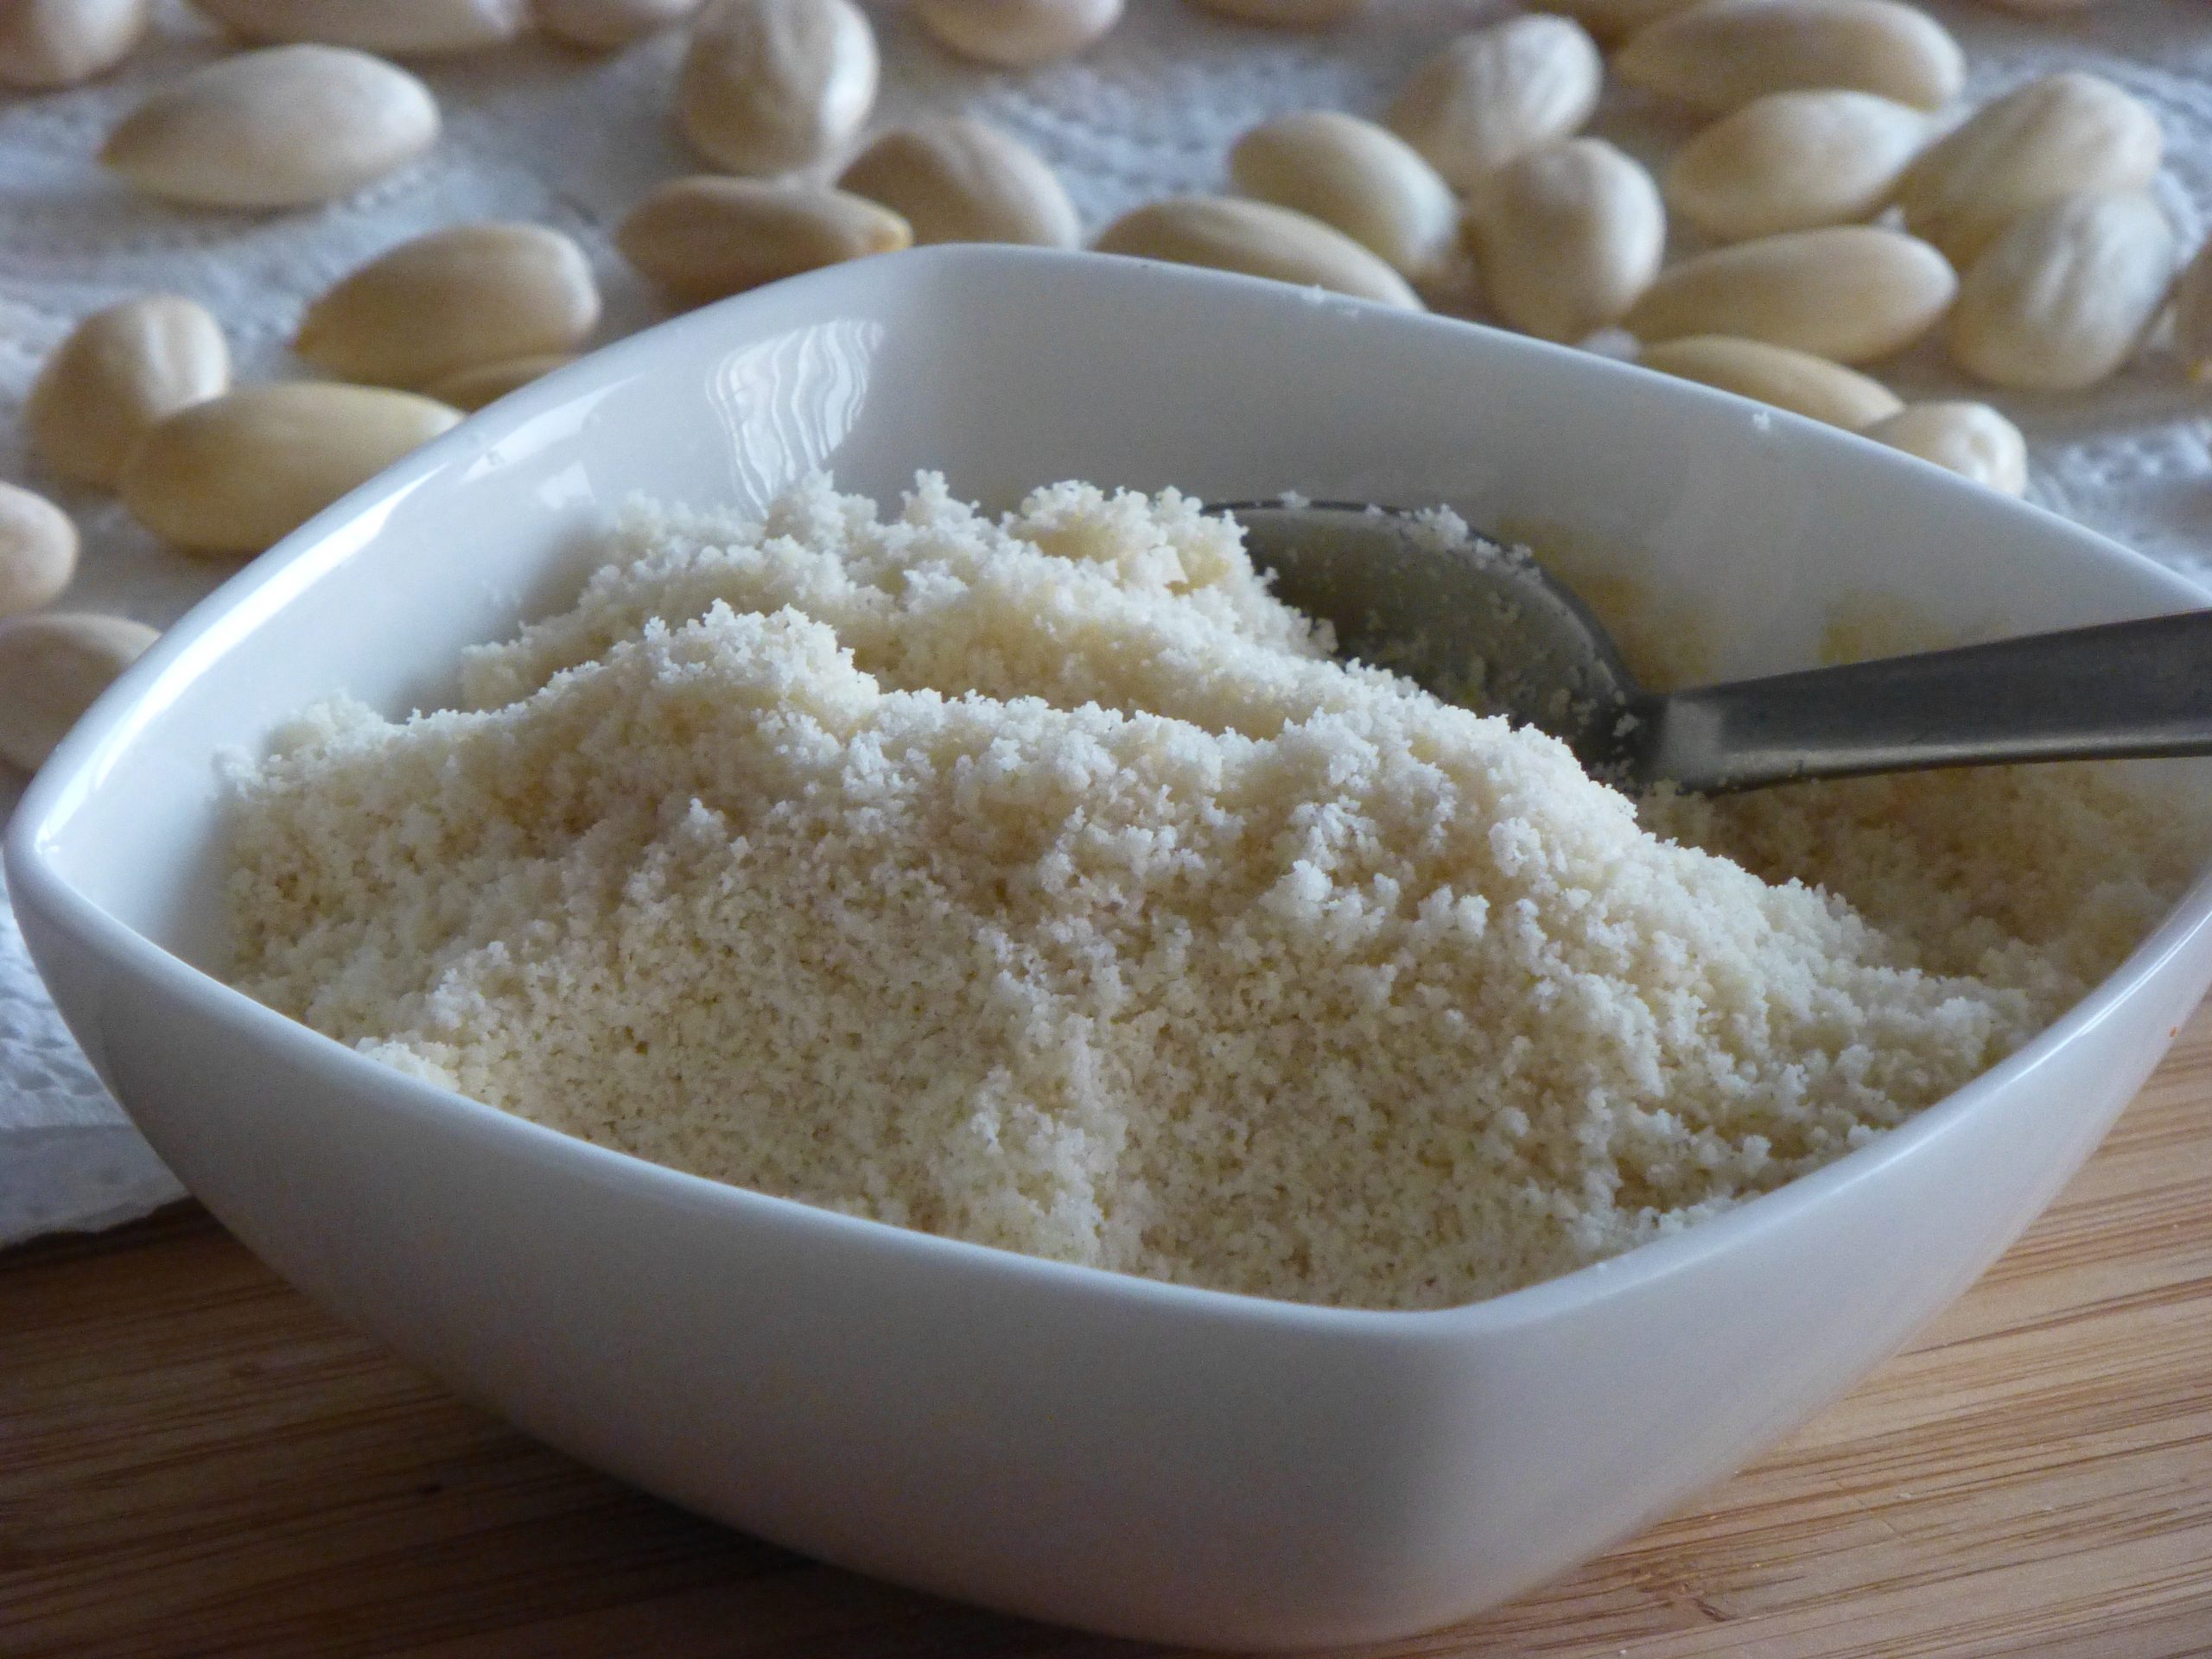 How to Make Almond Flour at Home